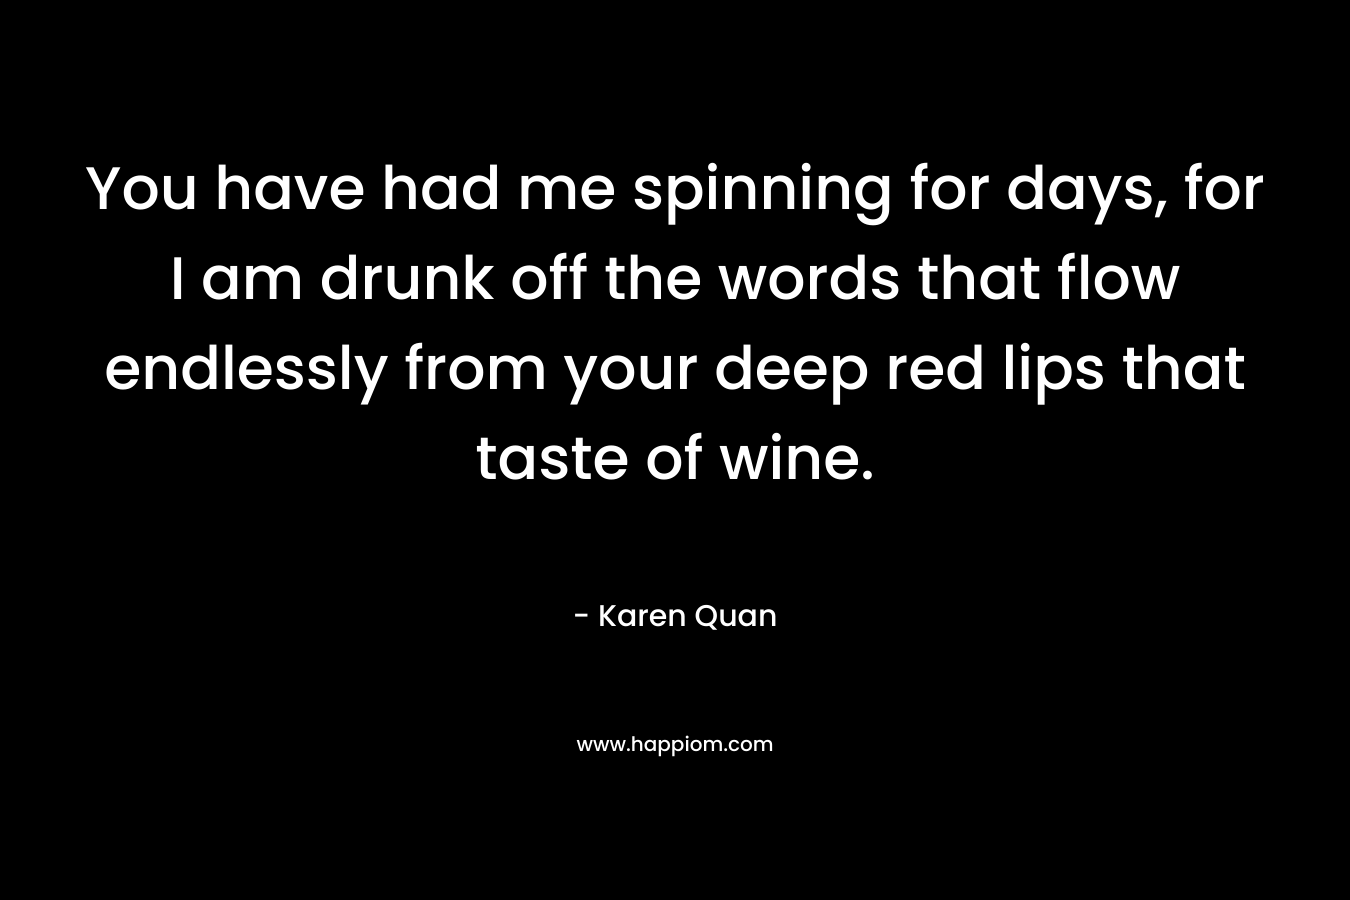 You have had me spinning for days, for I am drunk off the words that flow endlessly from your deep red lips that taste of wine. – Karen Quan